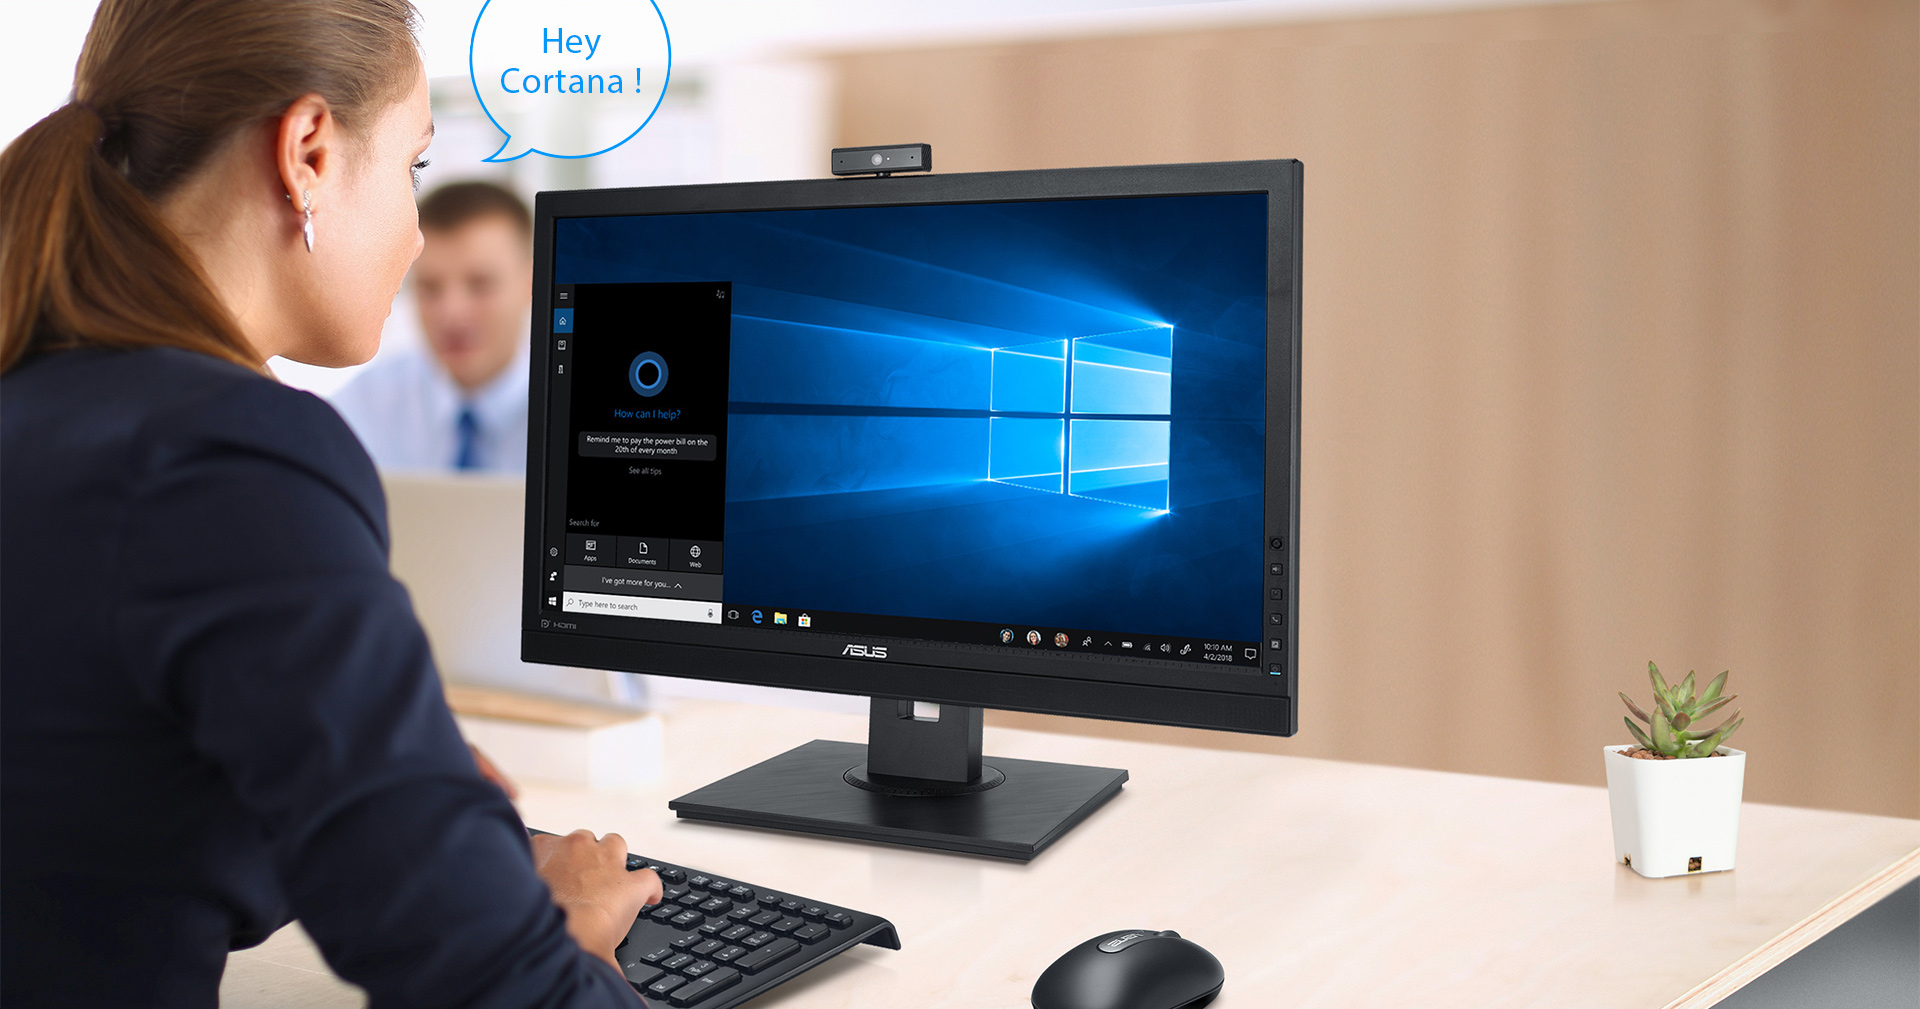 BE24DQLB's beam-forming microphone array separates speech from background noise, so it's perfect for use with Cortana, the Windows 10 smart assistant.